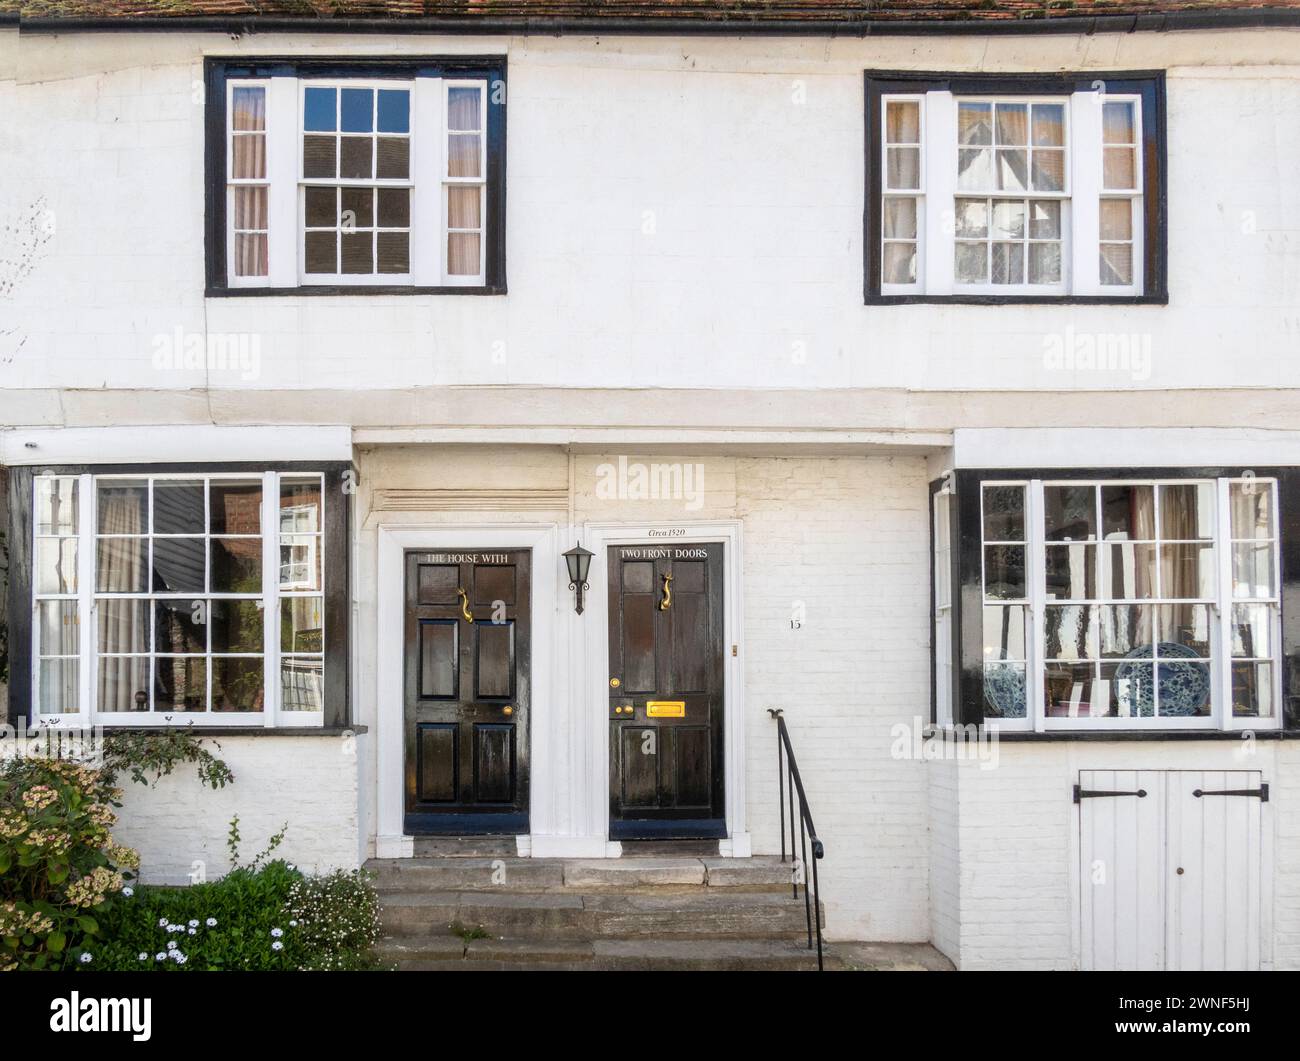 The House with Two Front Doors is a 15th century house on Mermaid Street, Rye, East Sussex, UK. Now used as a Bed & Breakfast business. Stock Photo